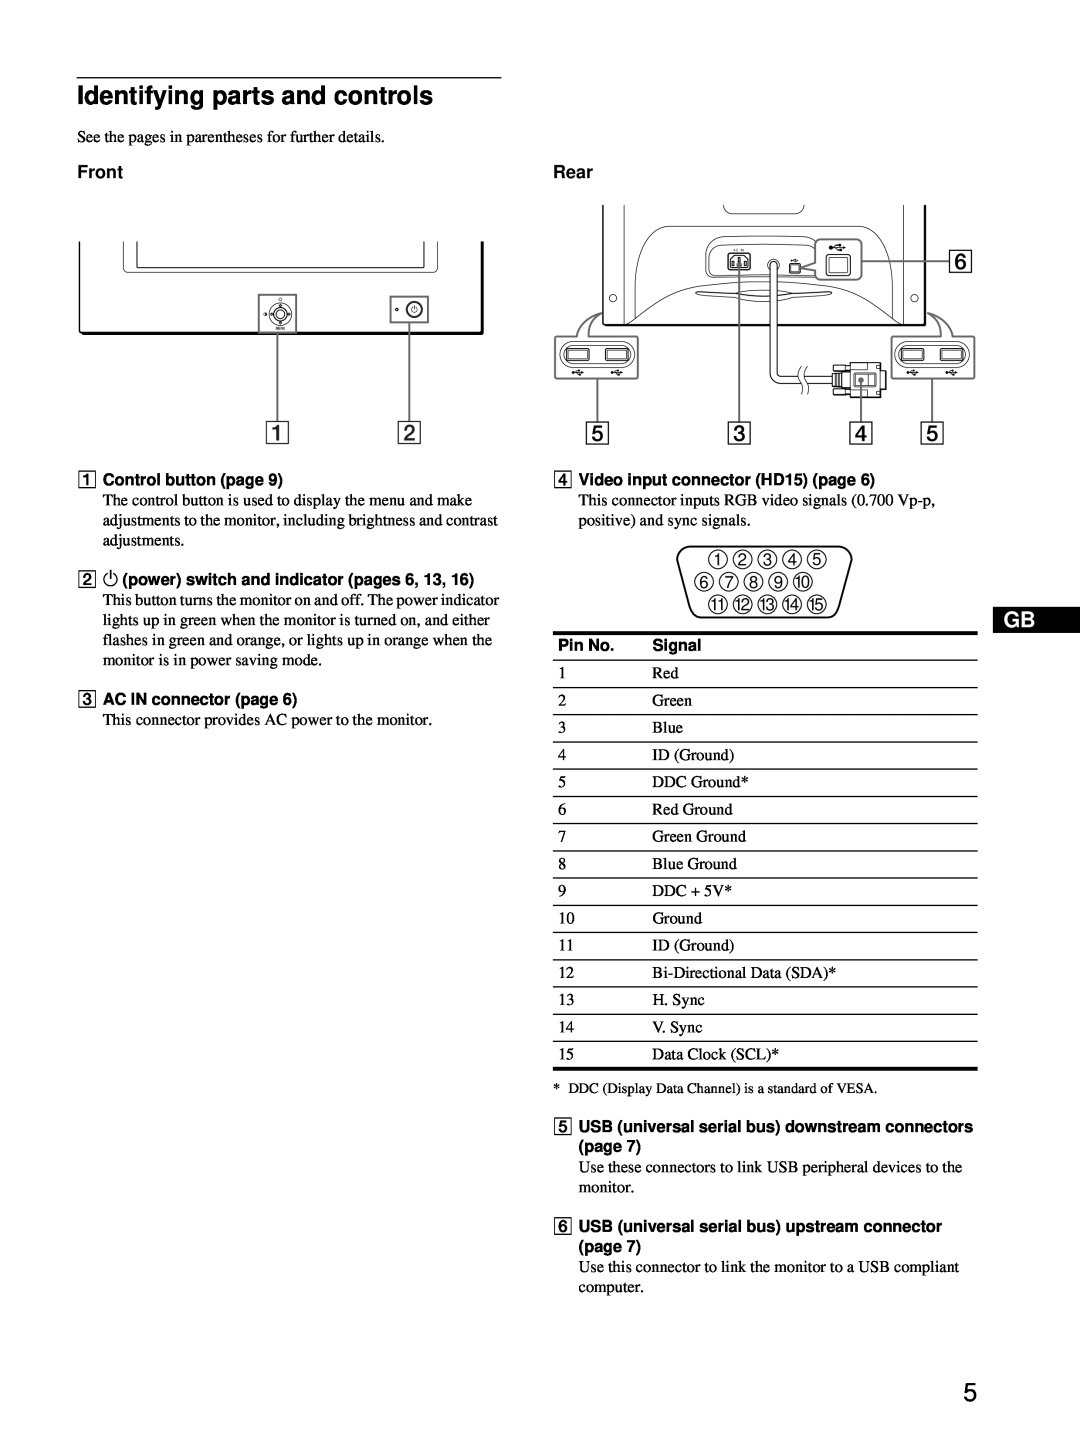 Sony HMD-A220 operating instructions Identifying parts and controls, Front, Rear 